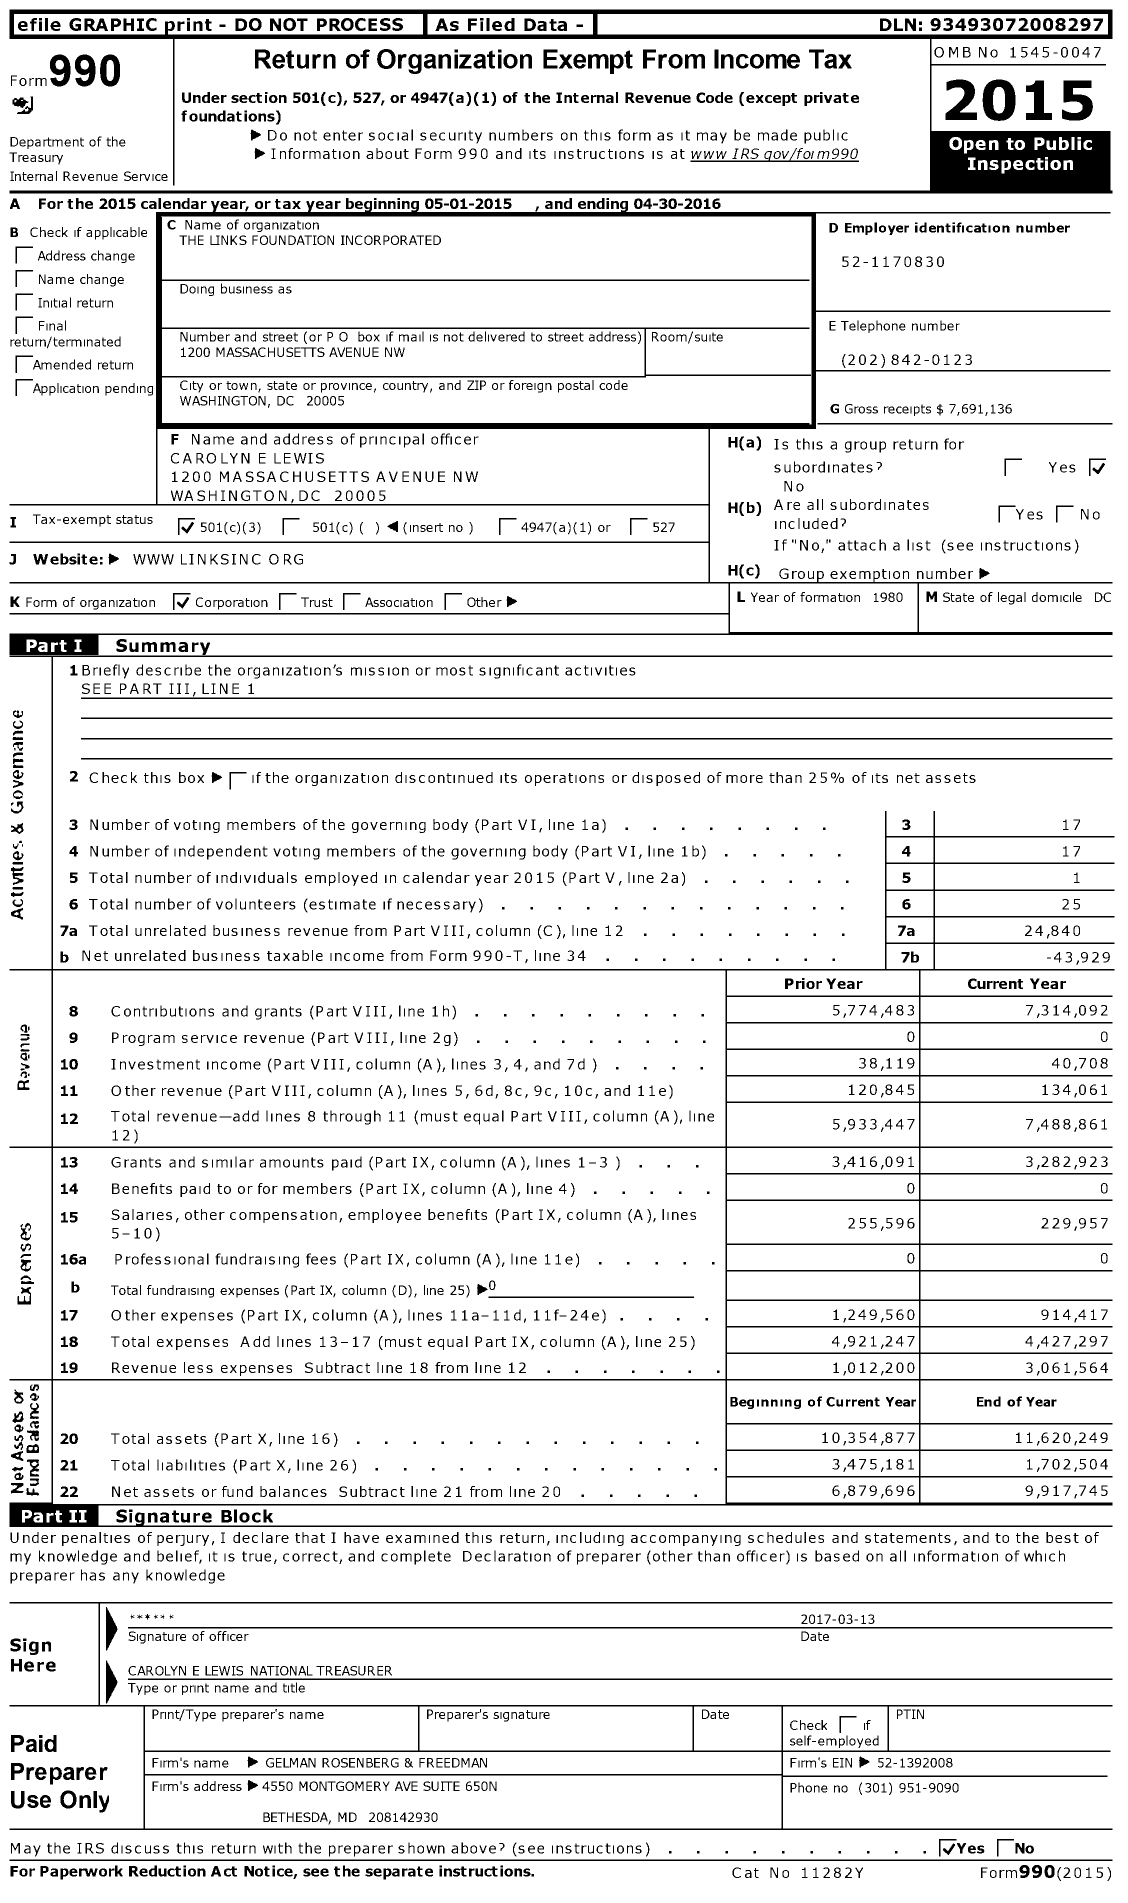 Image of first page of 2015 Form 990 for The Links Foundation Incorporated